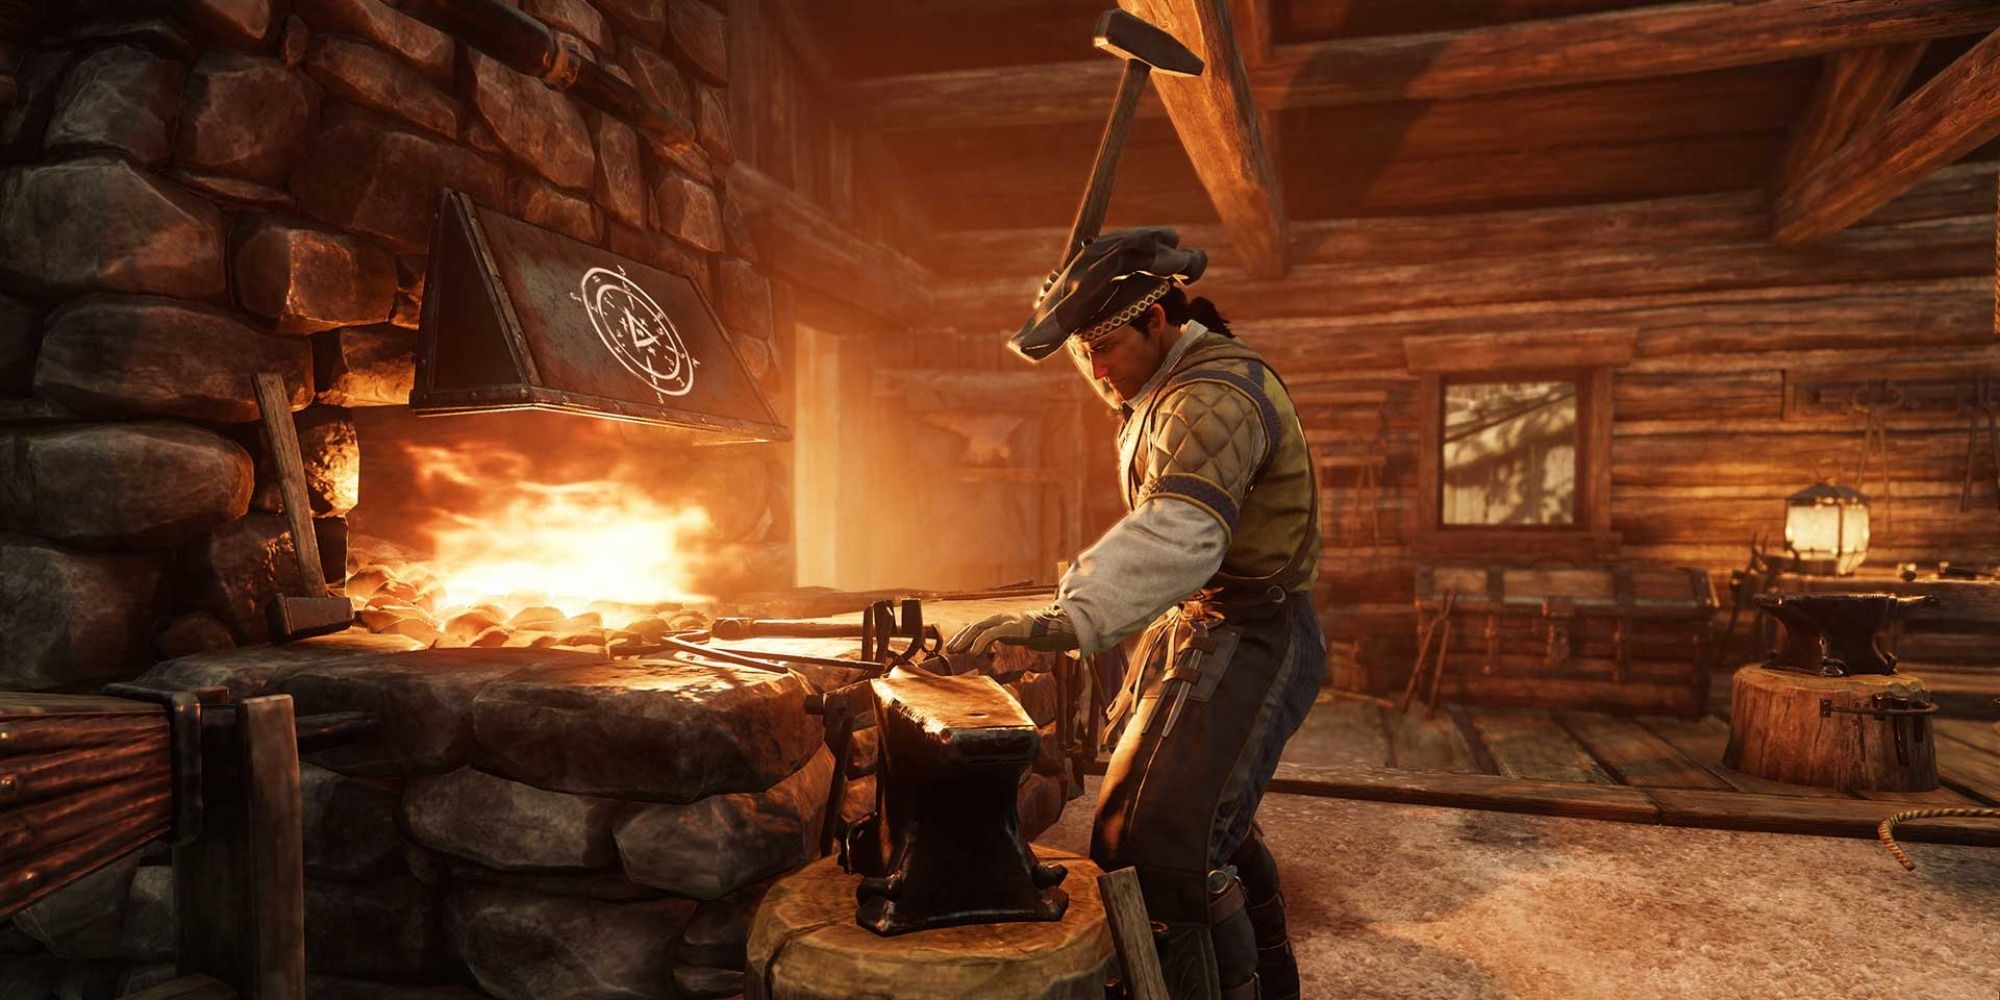 A player stands at a forge, hammering an item on an anvil